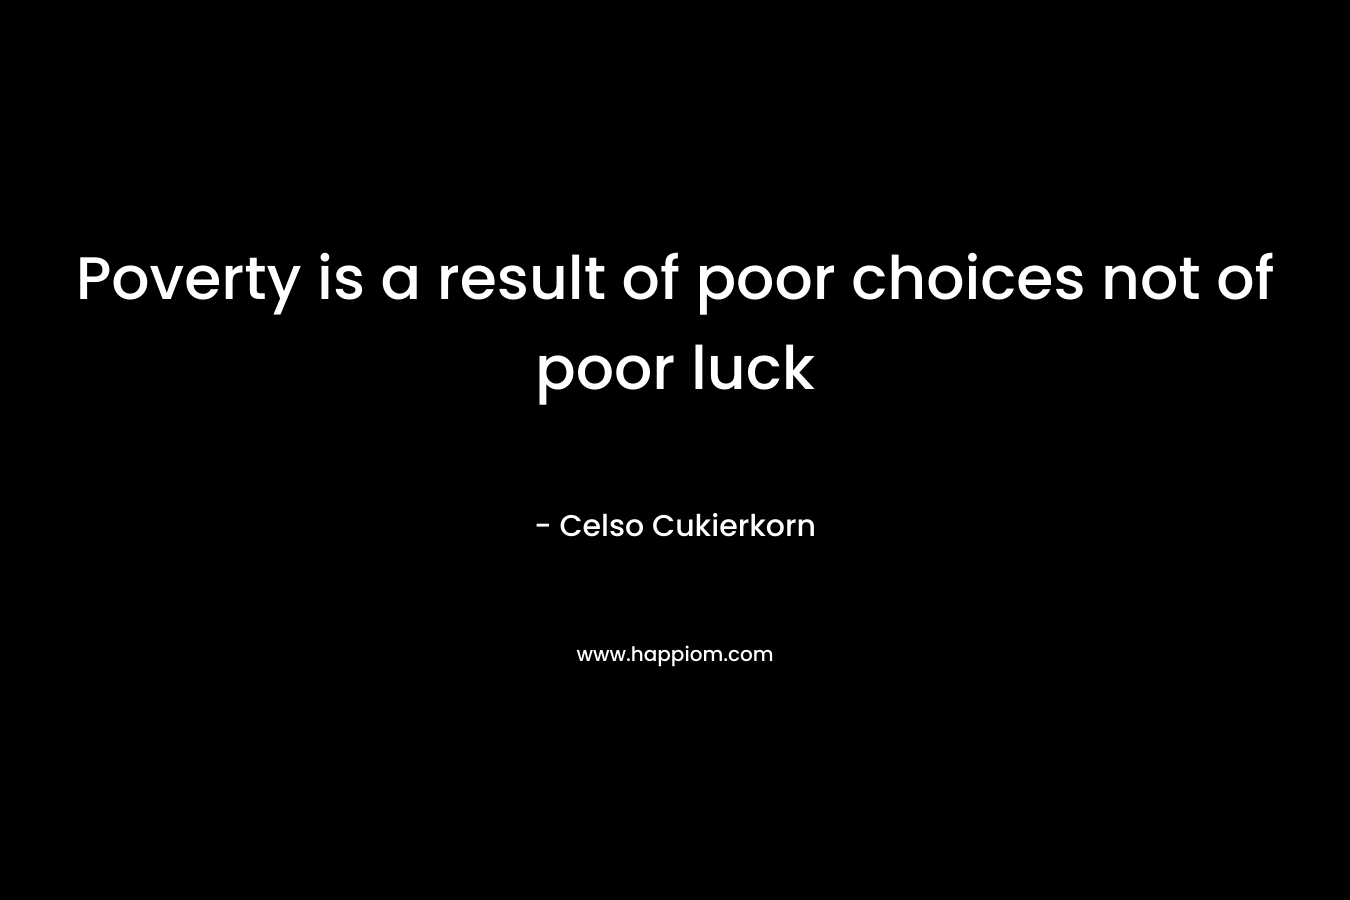 Poverty is a result of poor choices not of poor luck